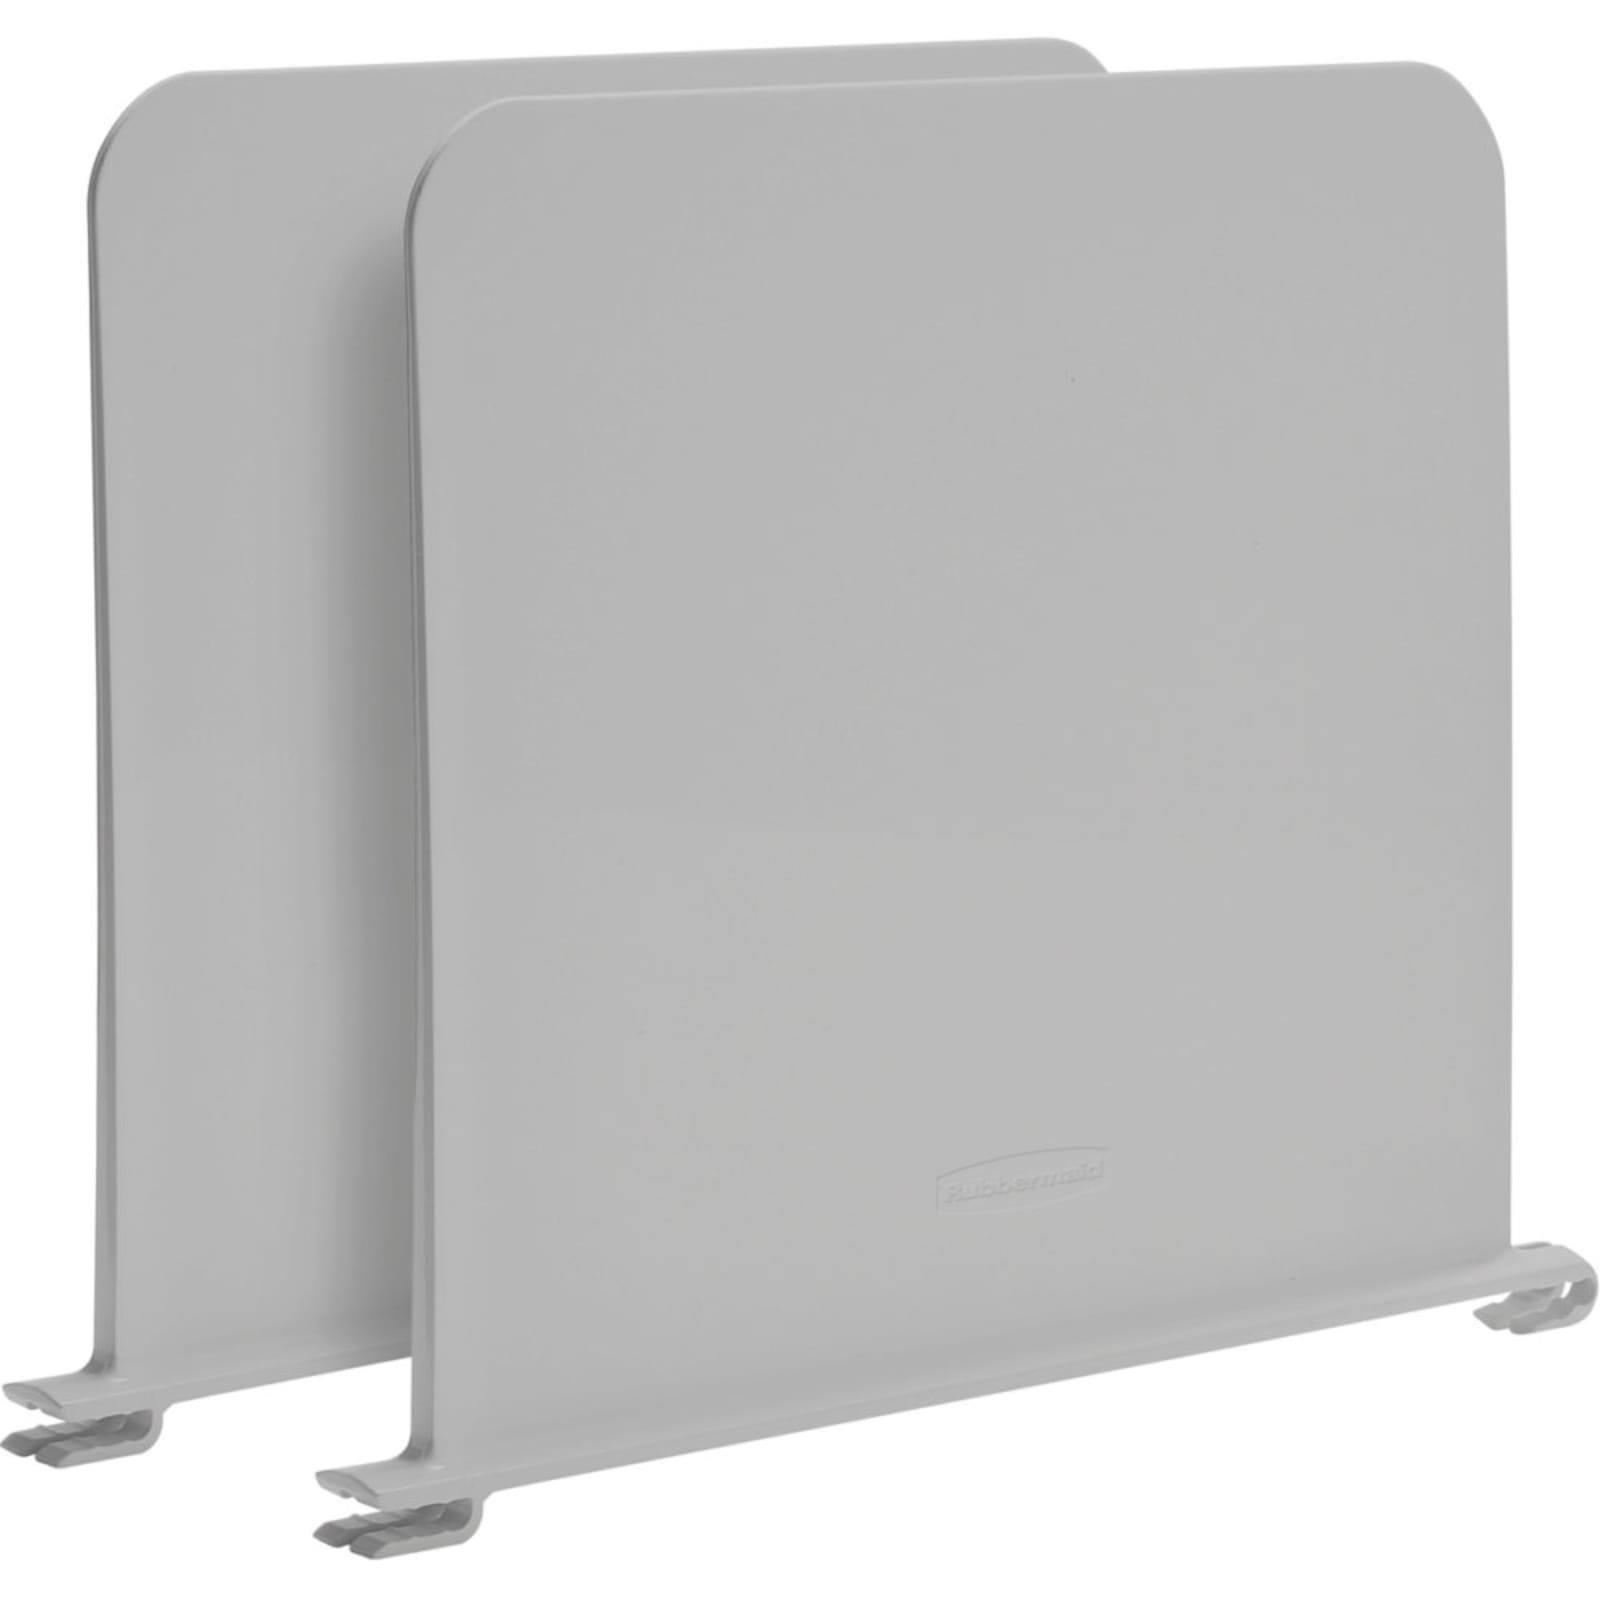 Rubbermaid FastTrack 0.787-in x 10.575-in x 12.567-in White 2-pack Plastic Shelf  Divider at